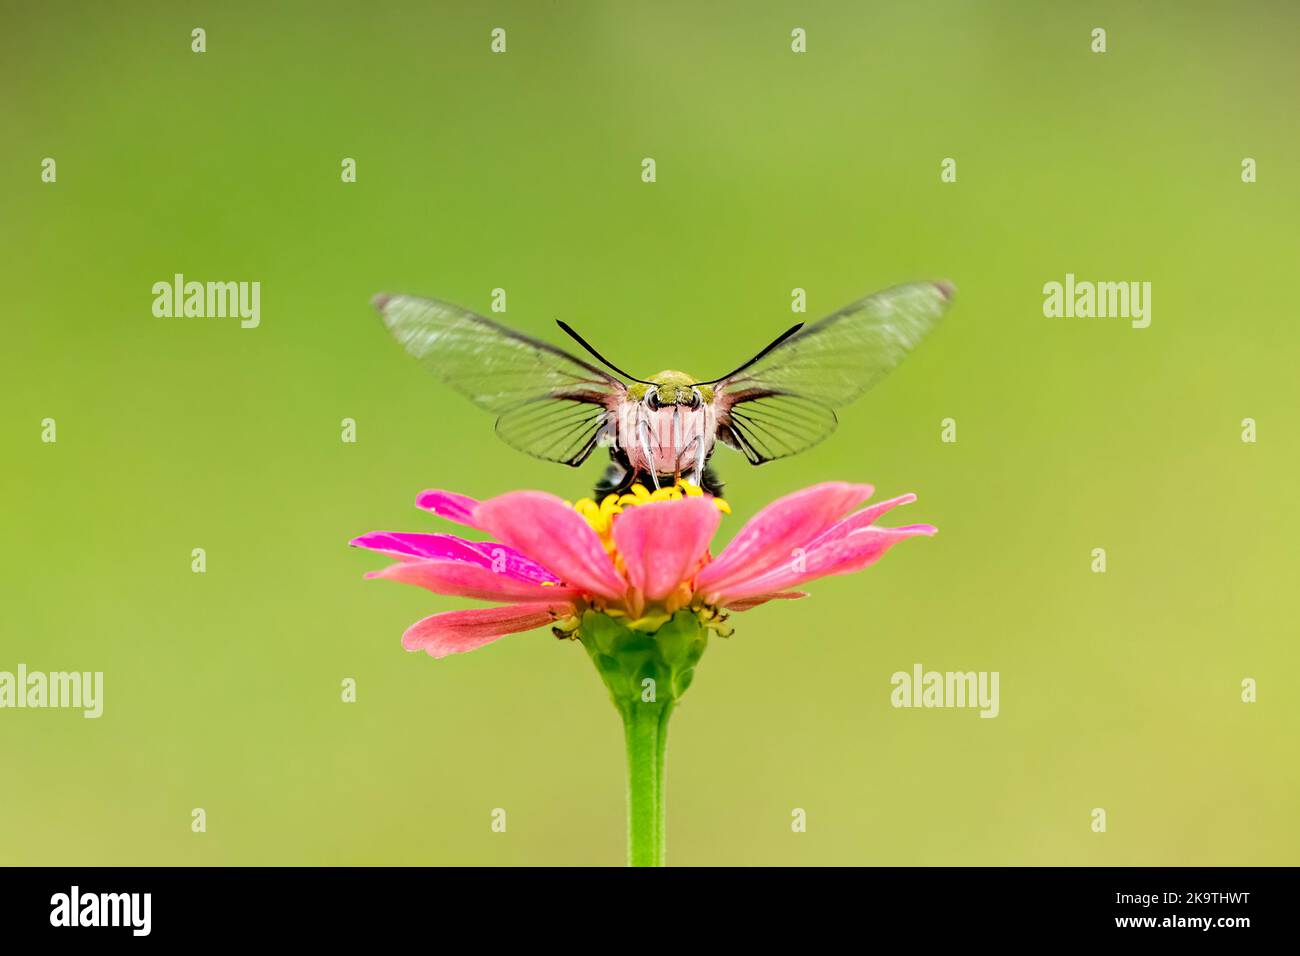 Close-up of a beautiful butterfly (Pellucid Hawk Moth) sitting a leave / flower during spring time on a sunny day Stock Photo